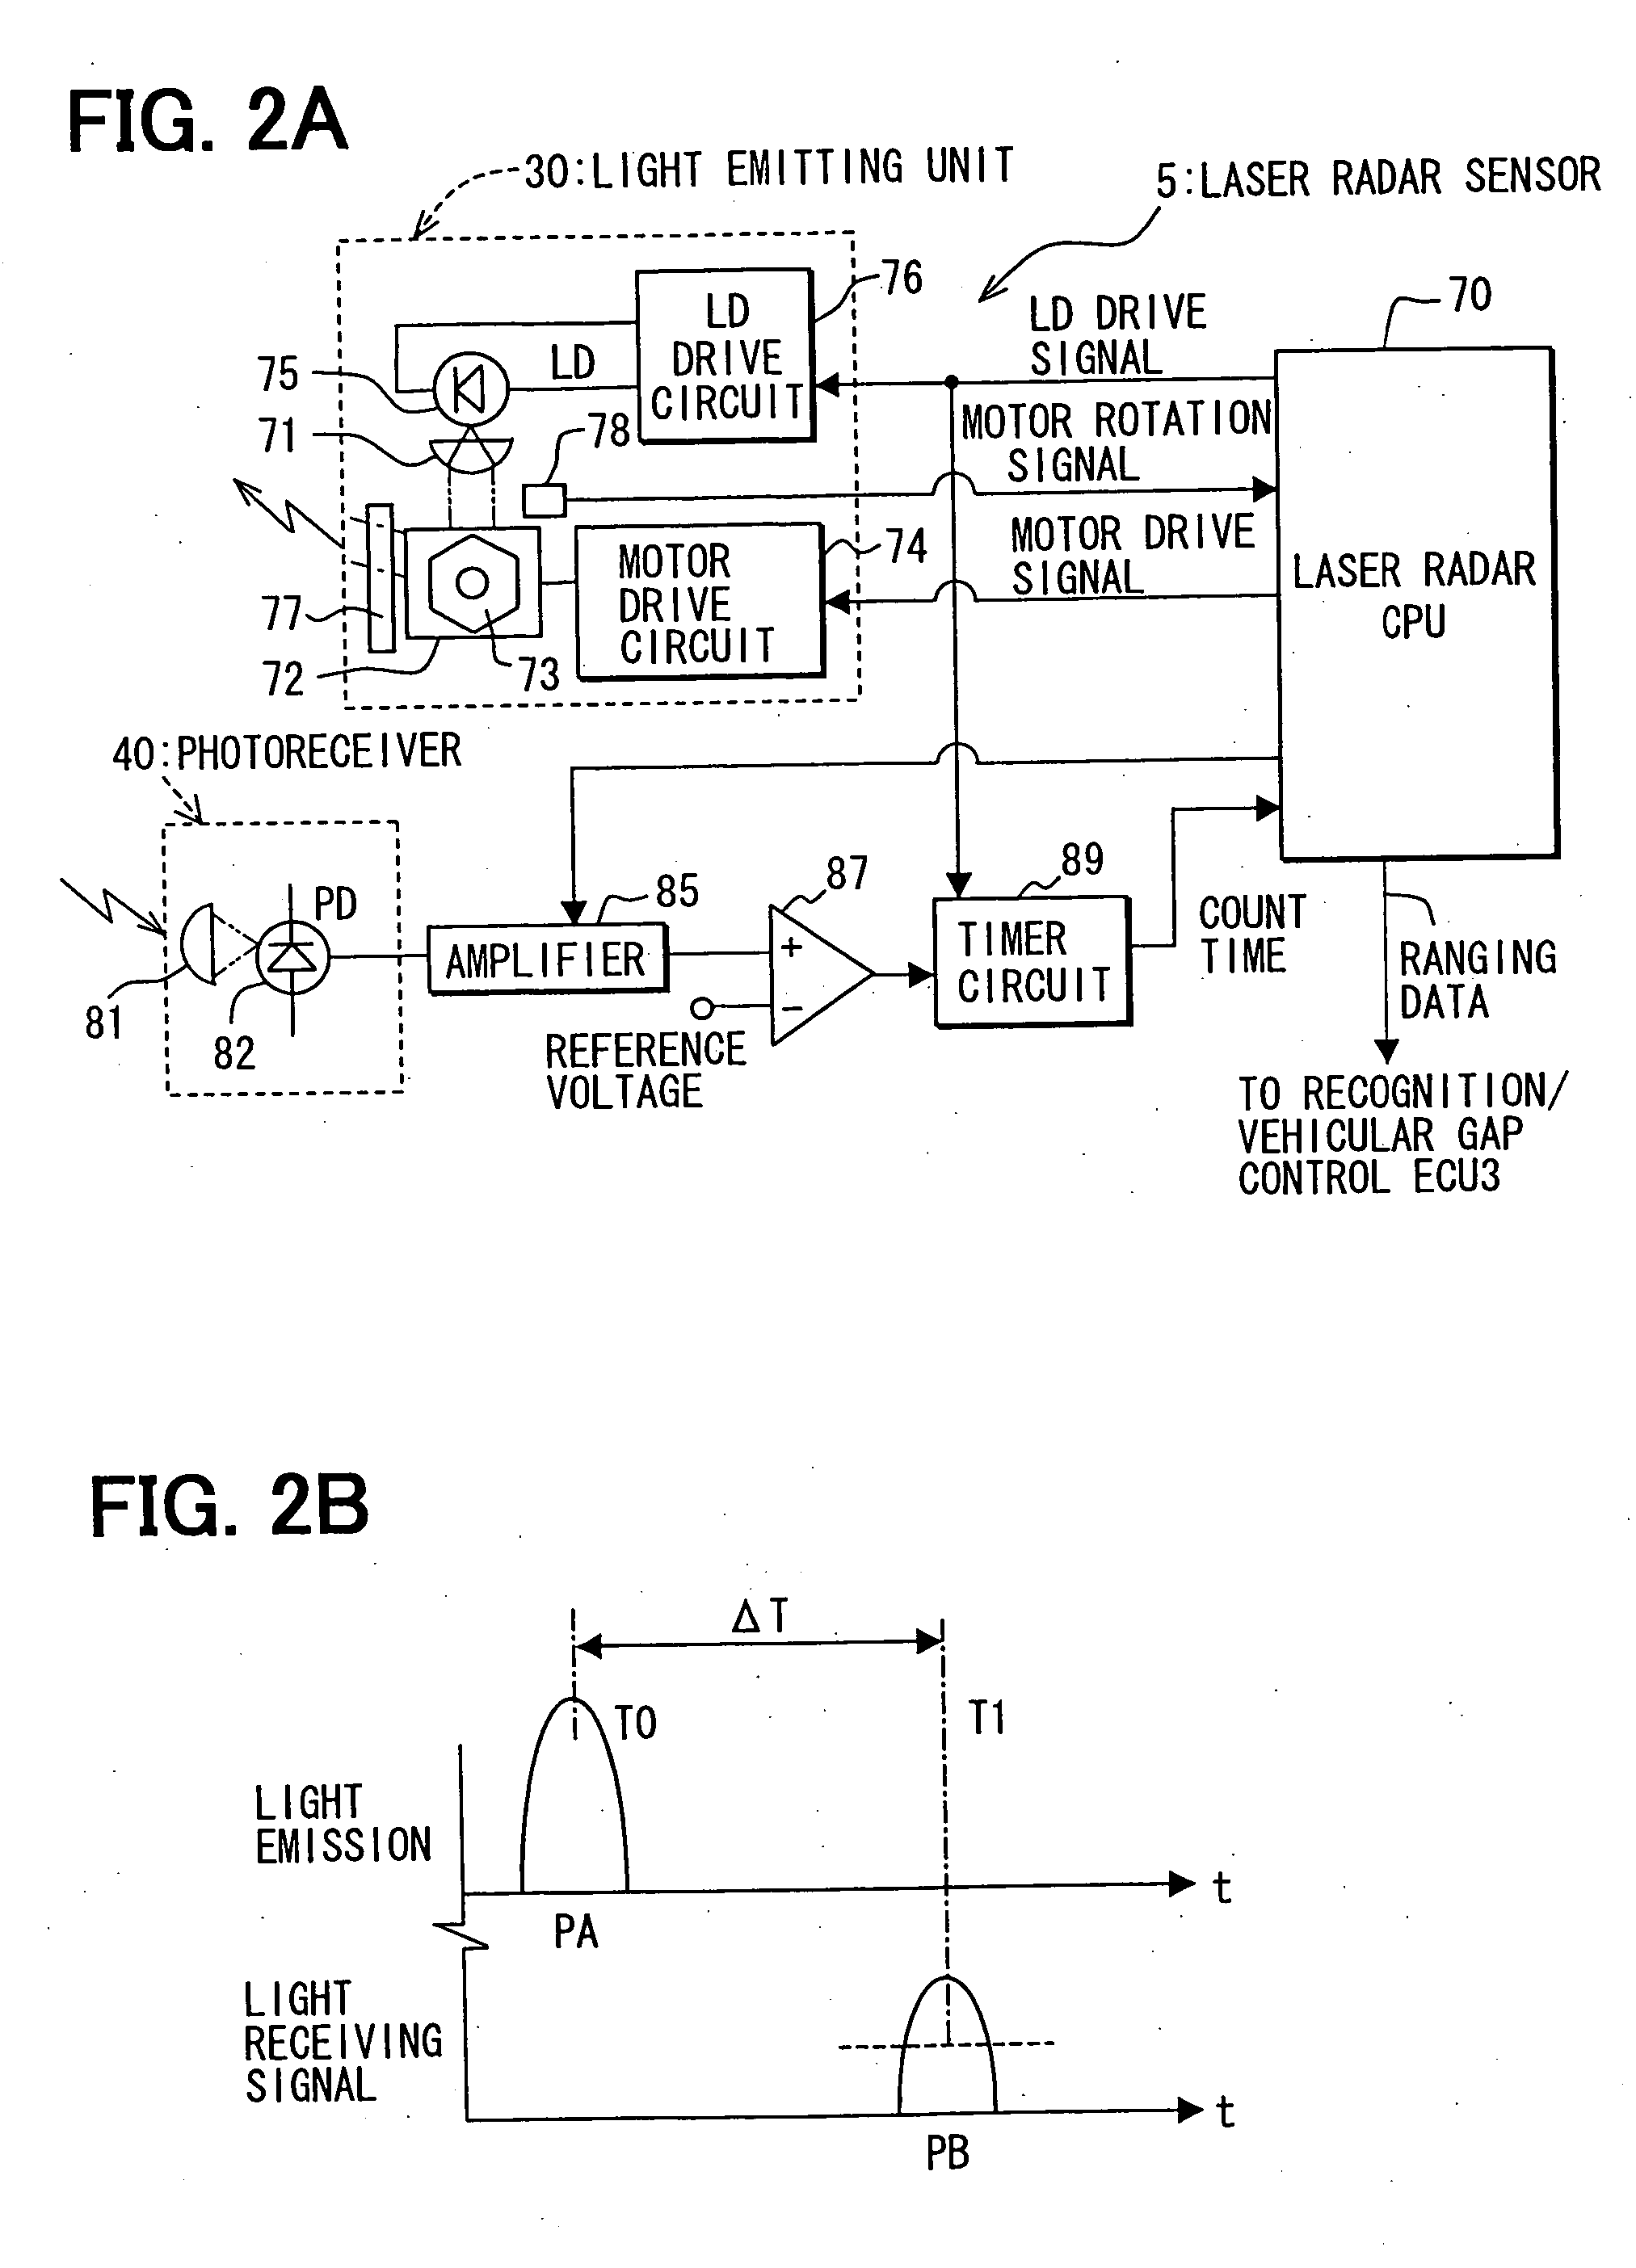 Object recognition system for vehicle